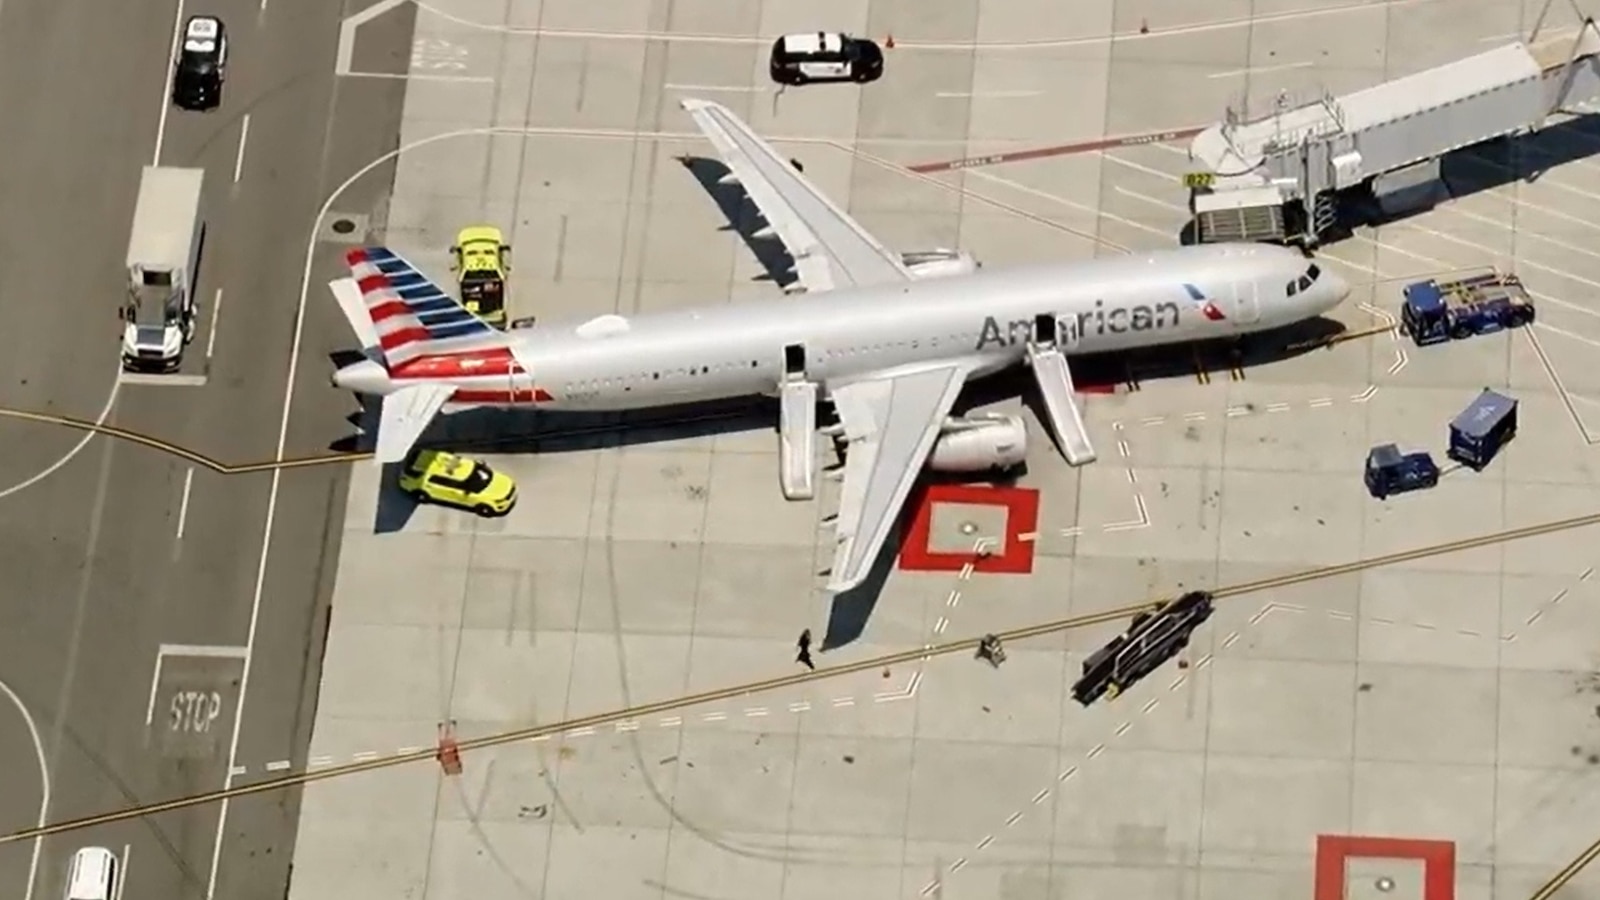 American Airlines flight evacuated after smoke reported during taxiing at San Francisco airport